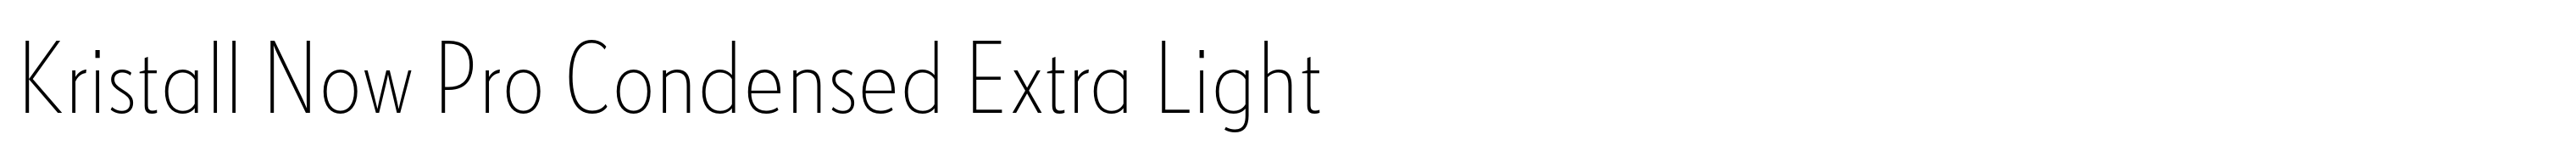 Kristall Now Pro Condensed Extra Light